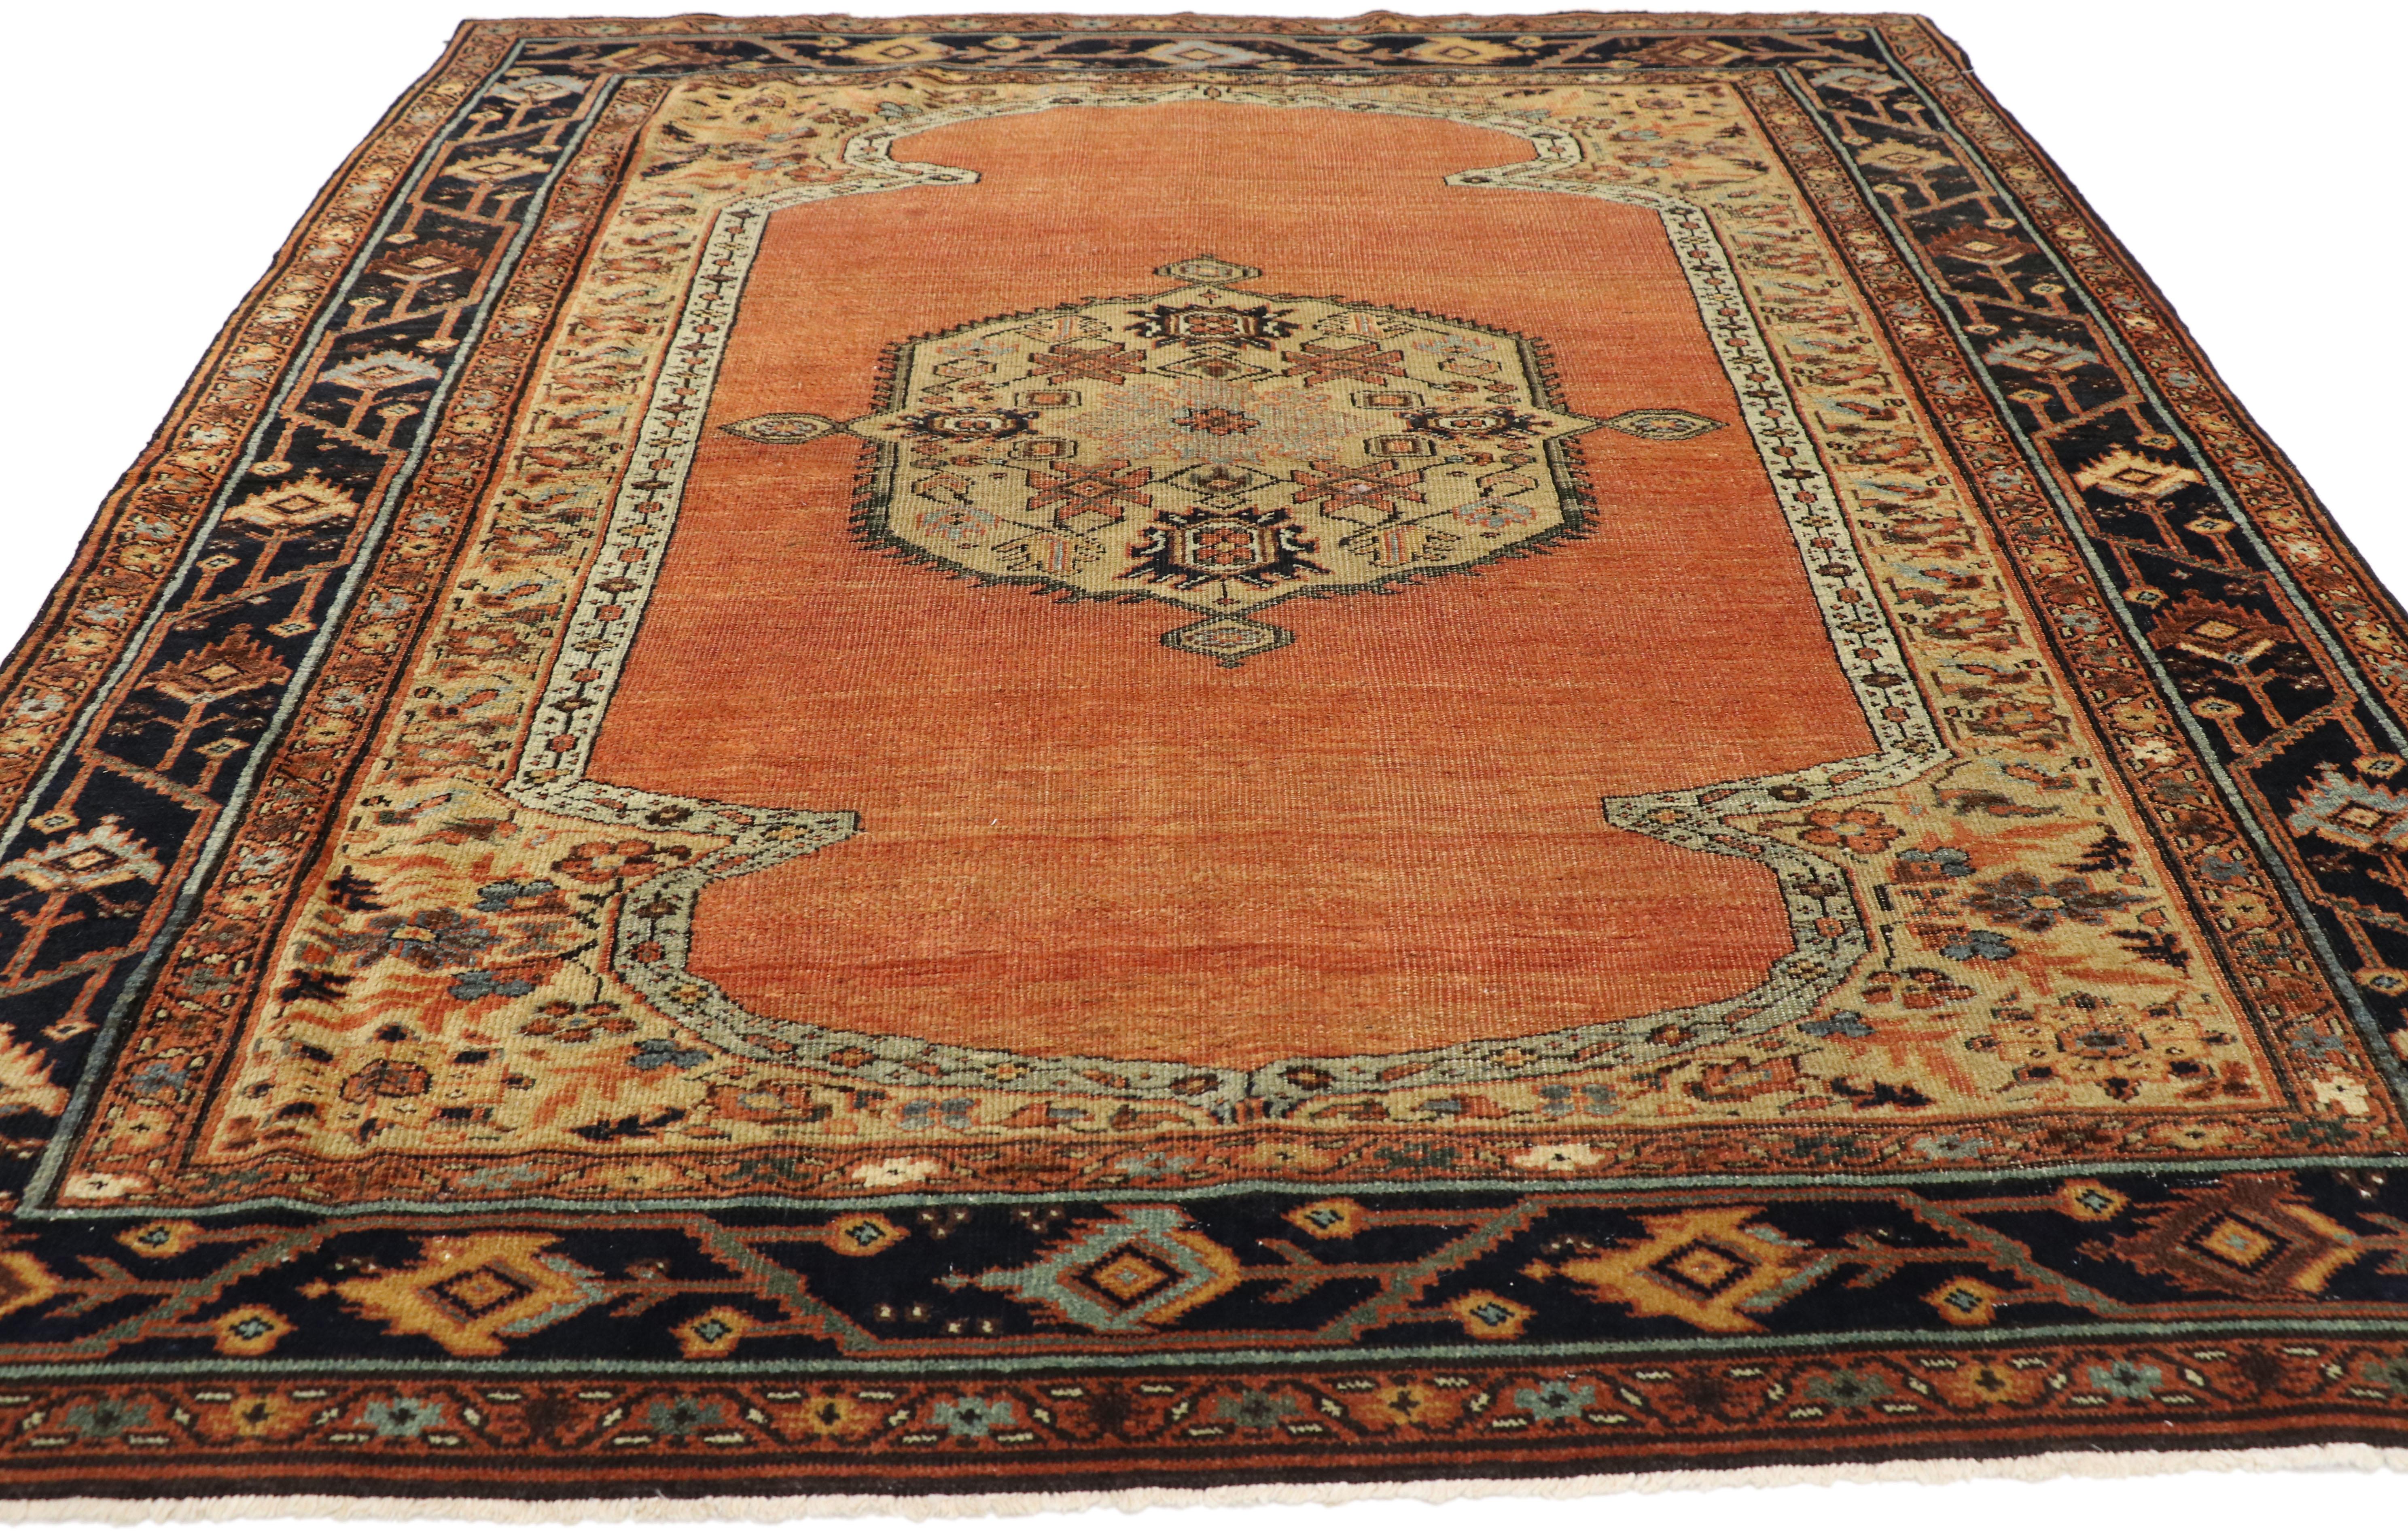 74953 Antique Persian Bakshaish Rug with Modern Northwest Style 05'07 x 06'01. ​With its bold elemental nature combined with neutral tones and bright color pop, this hand-knotted wool antique Persian Bakshaish rug embodies a modern northwest style.